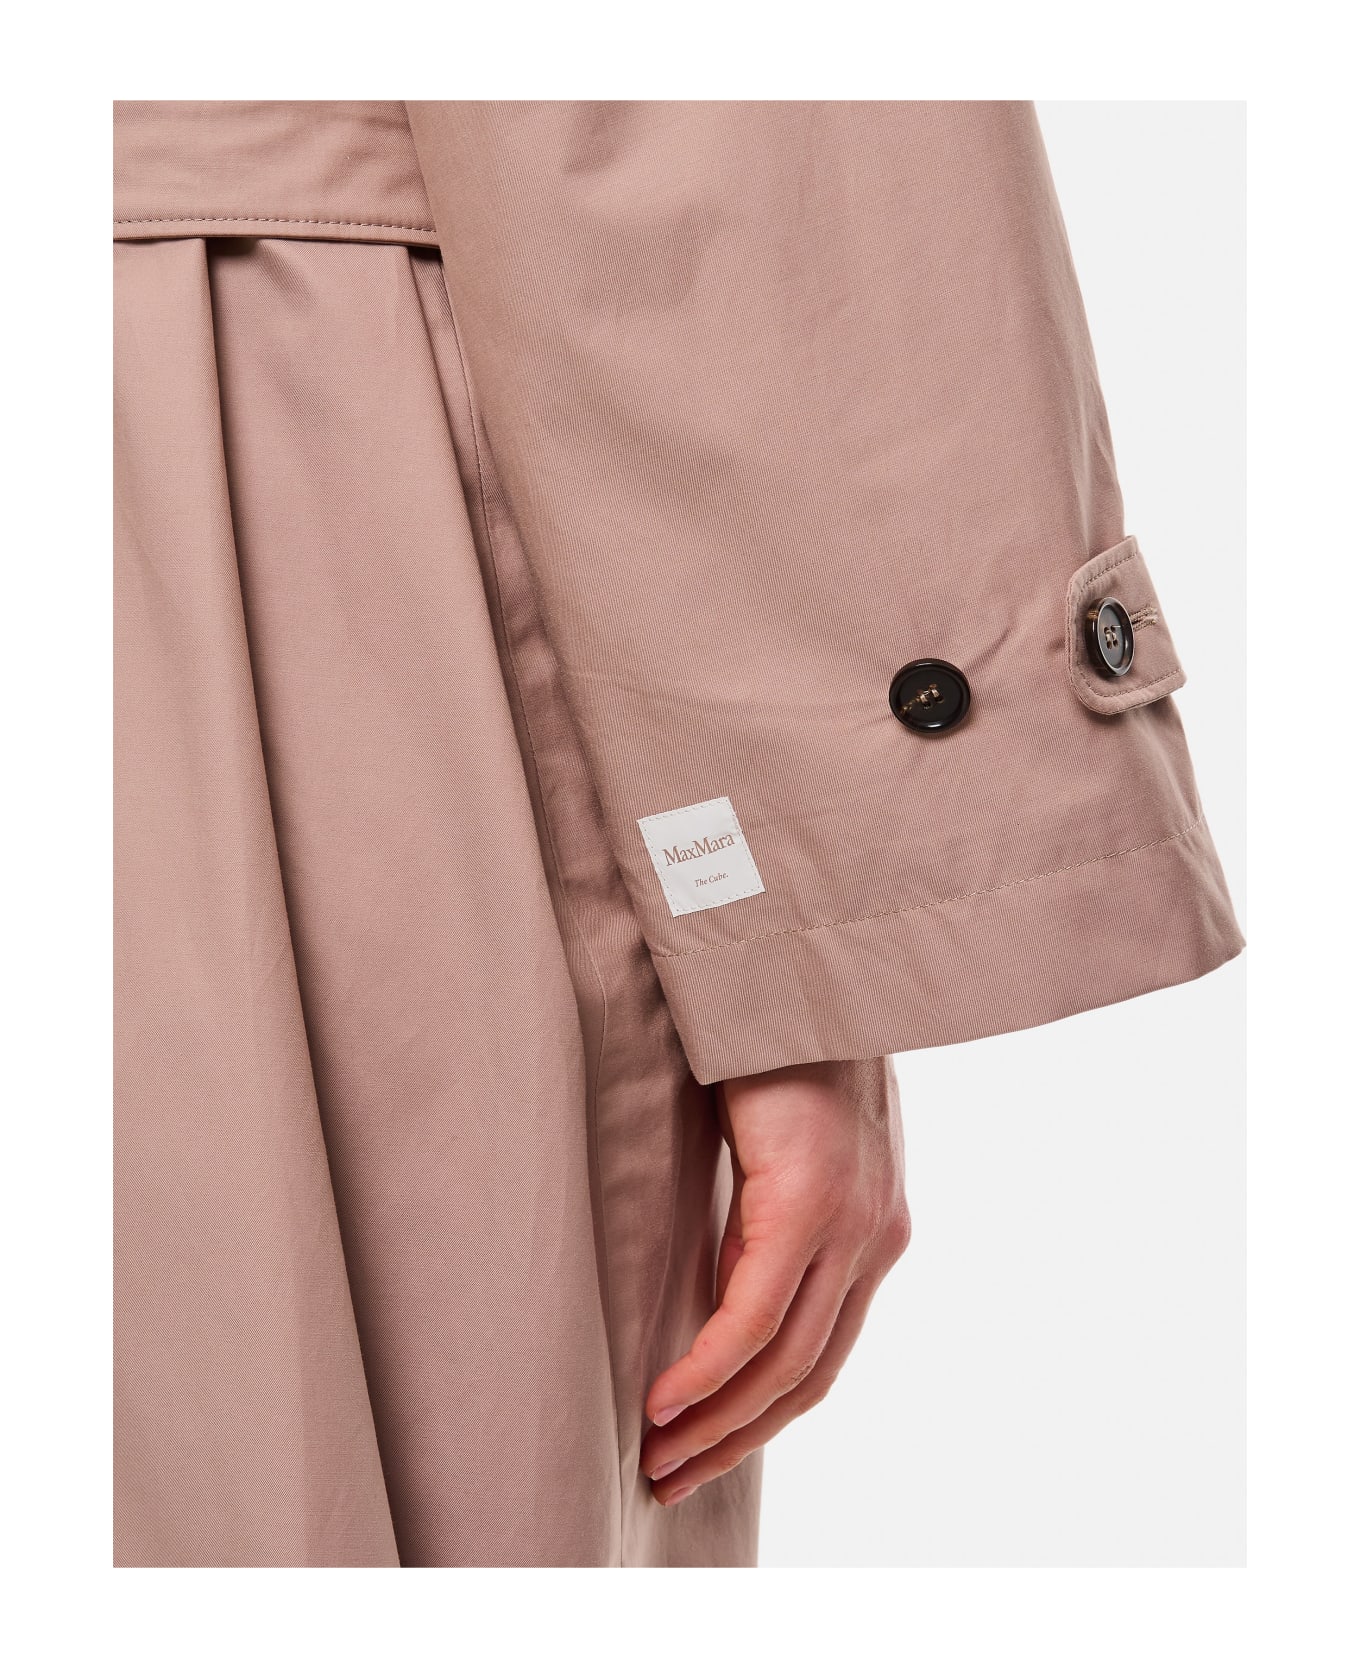 Max Mara The Cube Ftrench Trench Coat - Pink コート